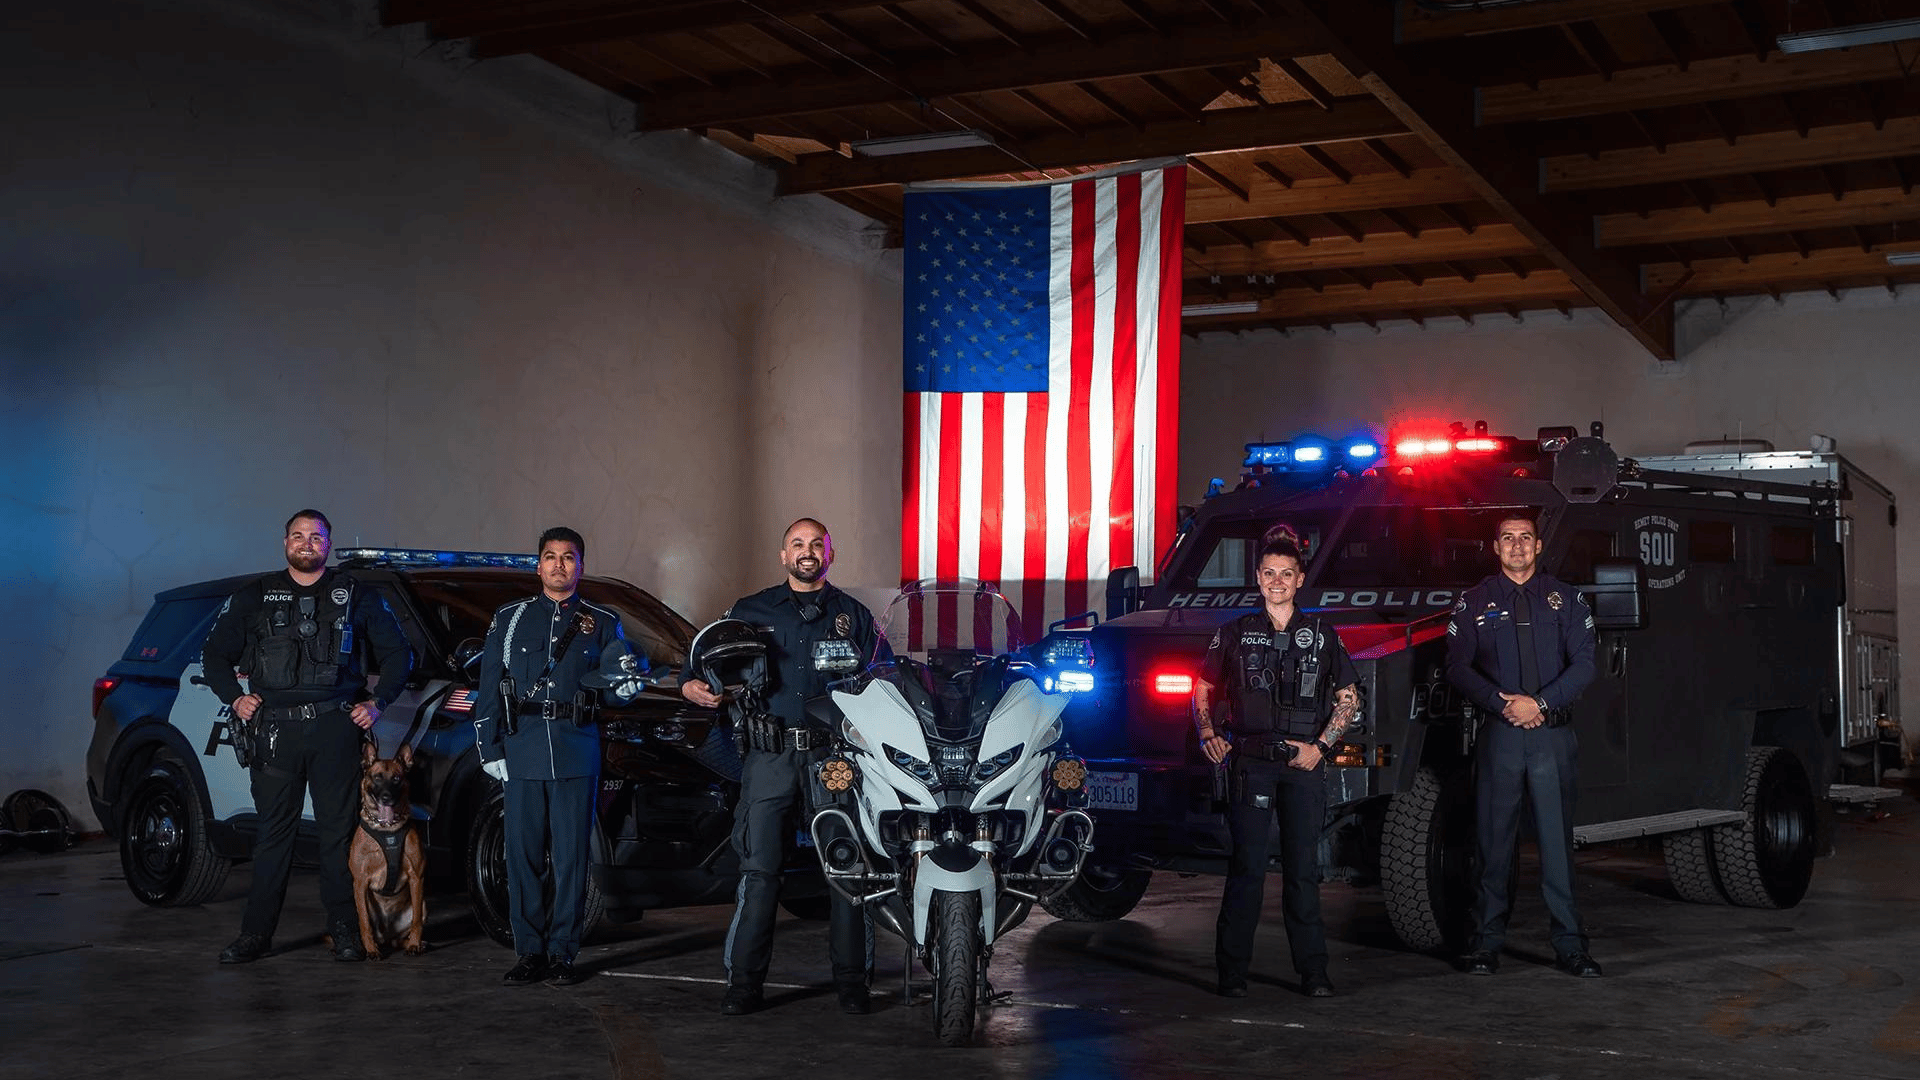 Members of the Hemet Police Department and their vehicles.